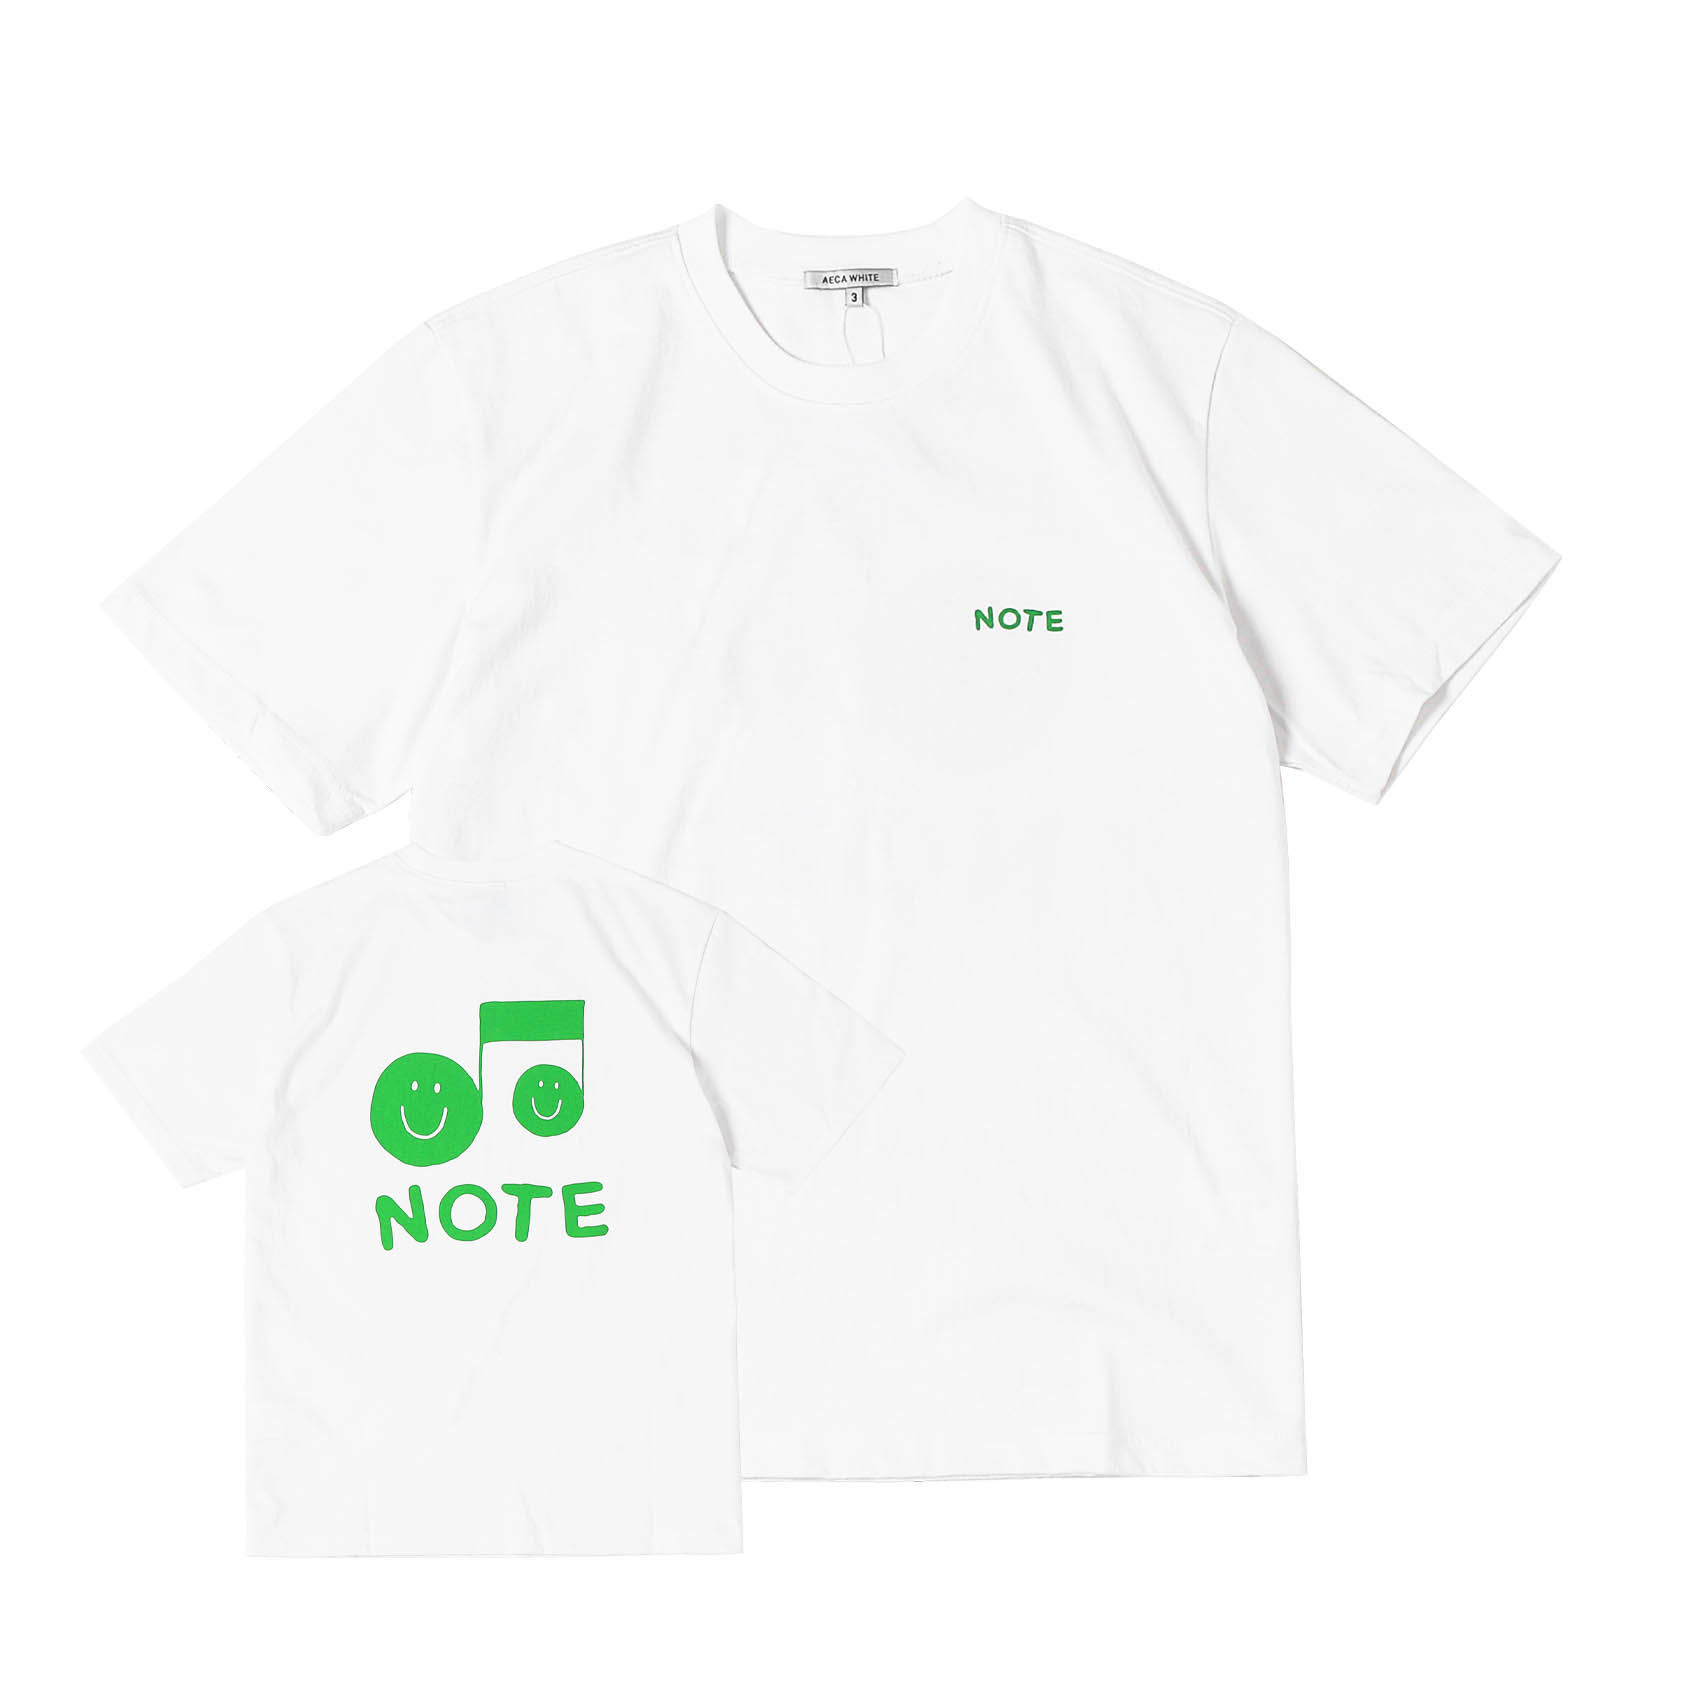 NOTE GRAPHIC TEE - GREEN